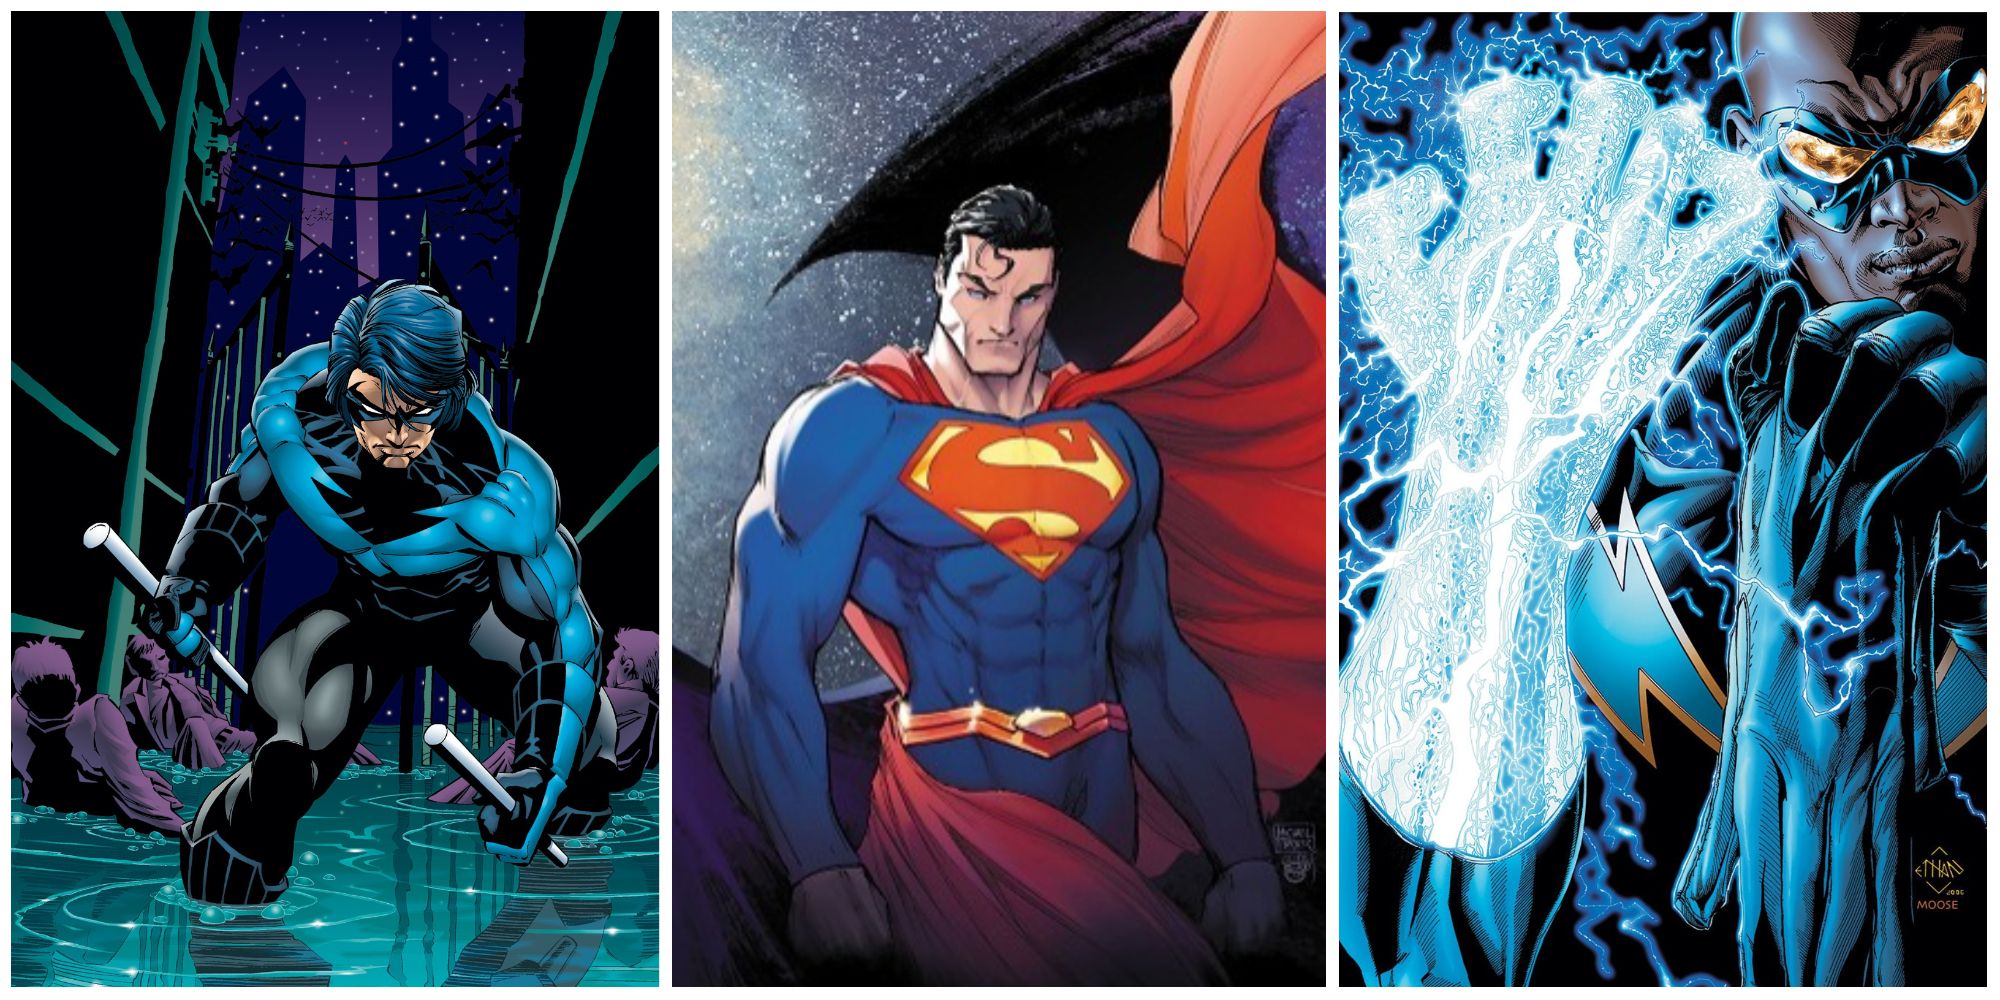 split image of Nightwing, Superman and Black Lightning from DC Comics